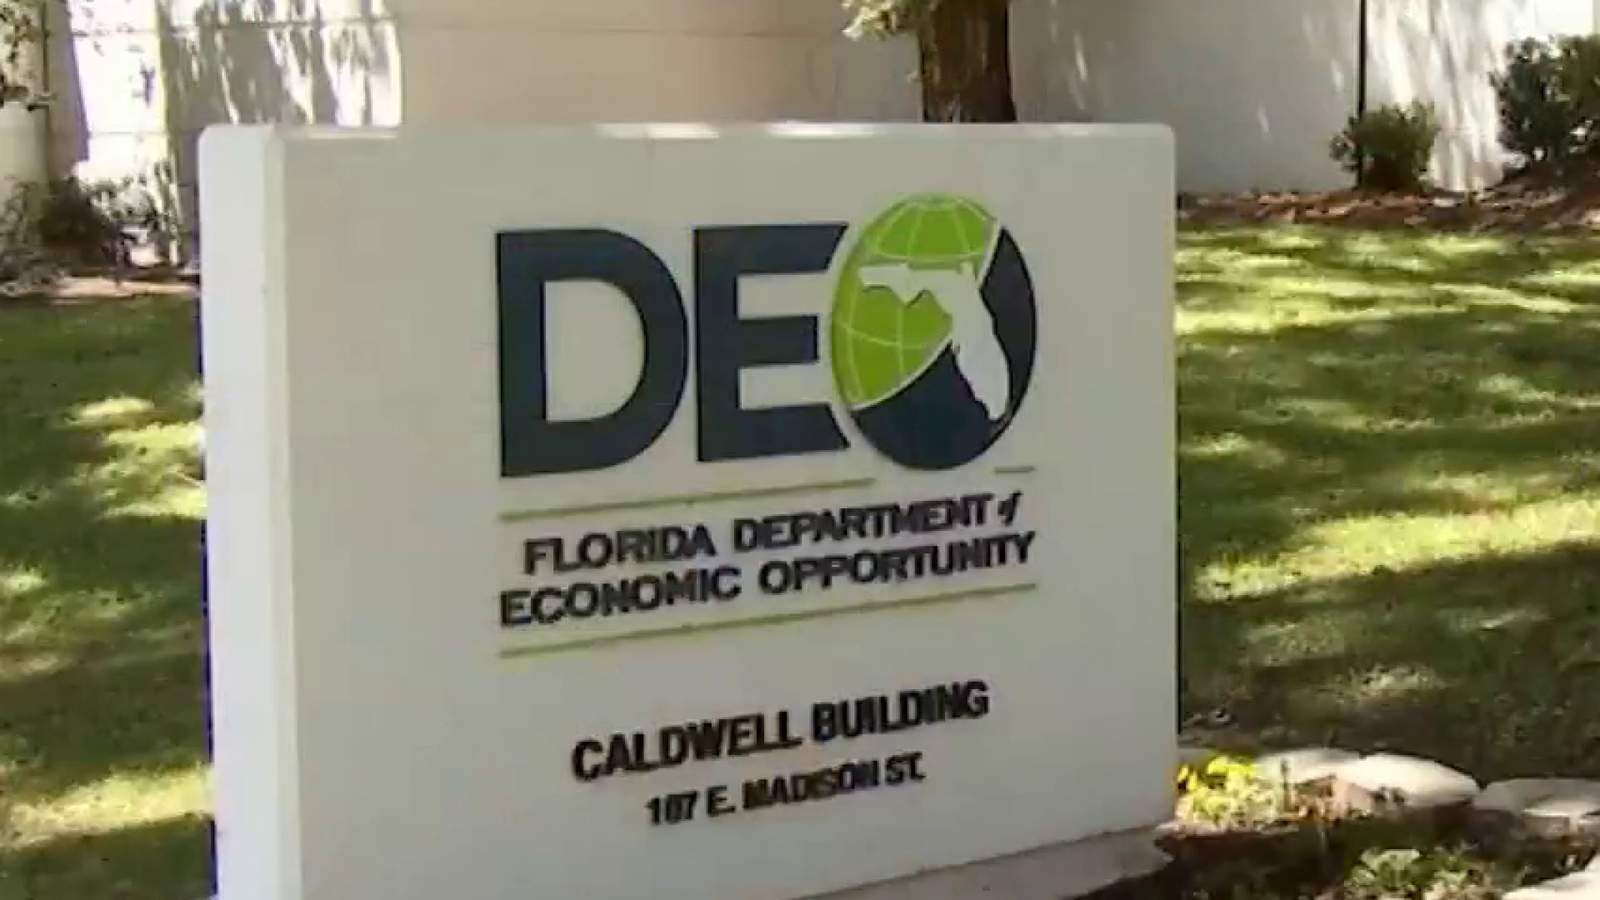 Data breach exposes Social Security info of some Floridians seeking unemployment benefits